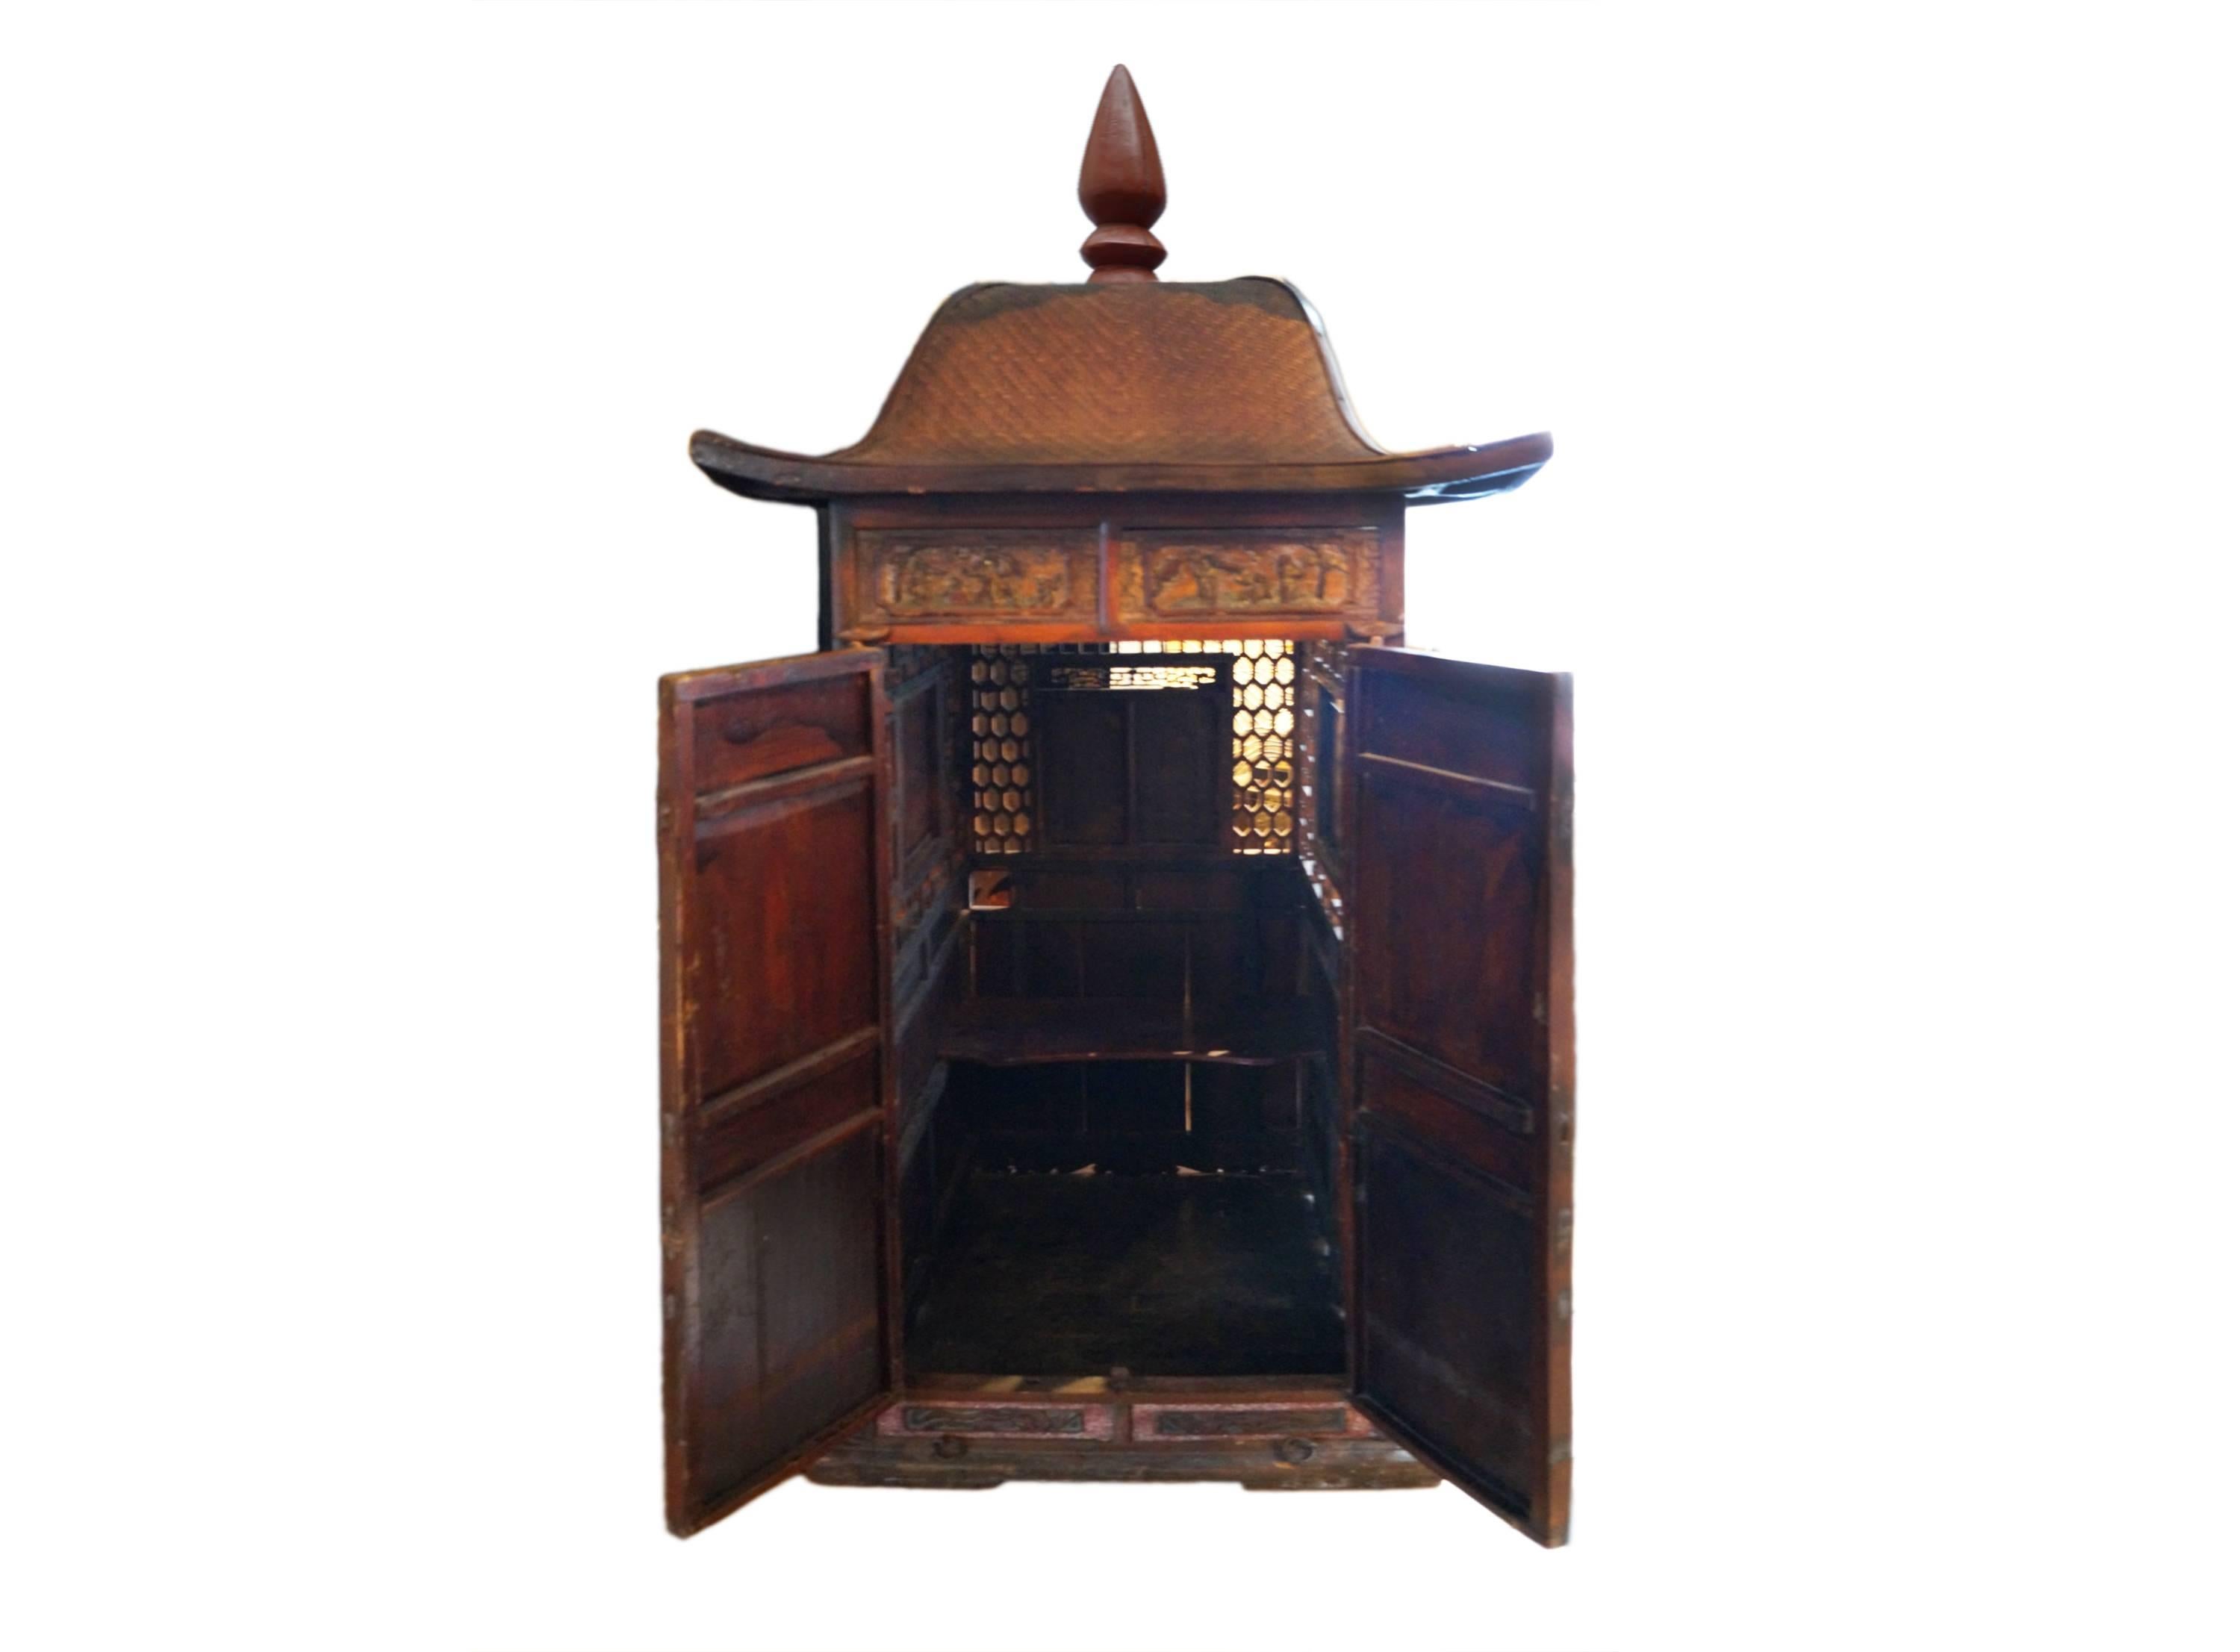 China 1800-1850
Beautiful sedan [named Jiaoyu] with good patina.
Also used to bring the bride to the wedding.
Decorated with images from daily life.

Good condition. Extremely decorative.

Measures:H 196cm x W 60cm x D 71cm.